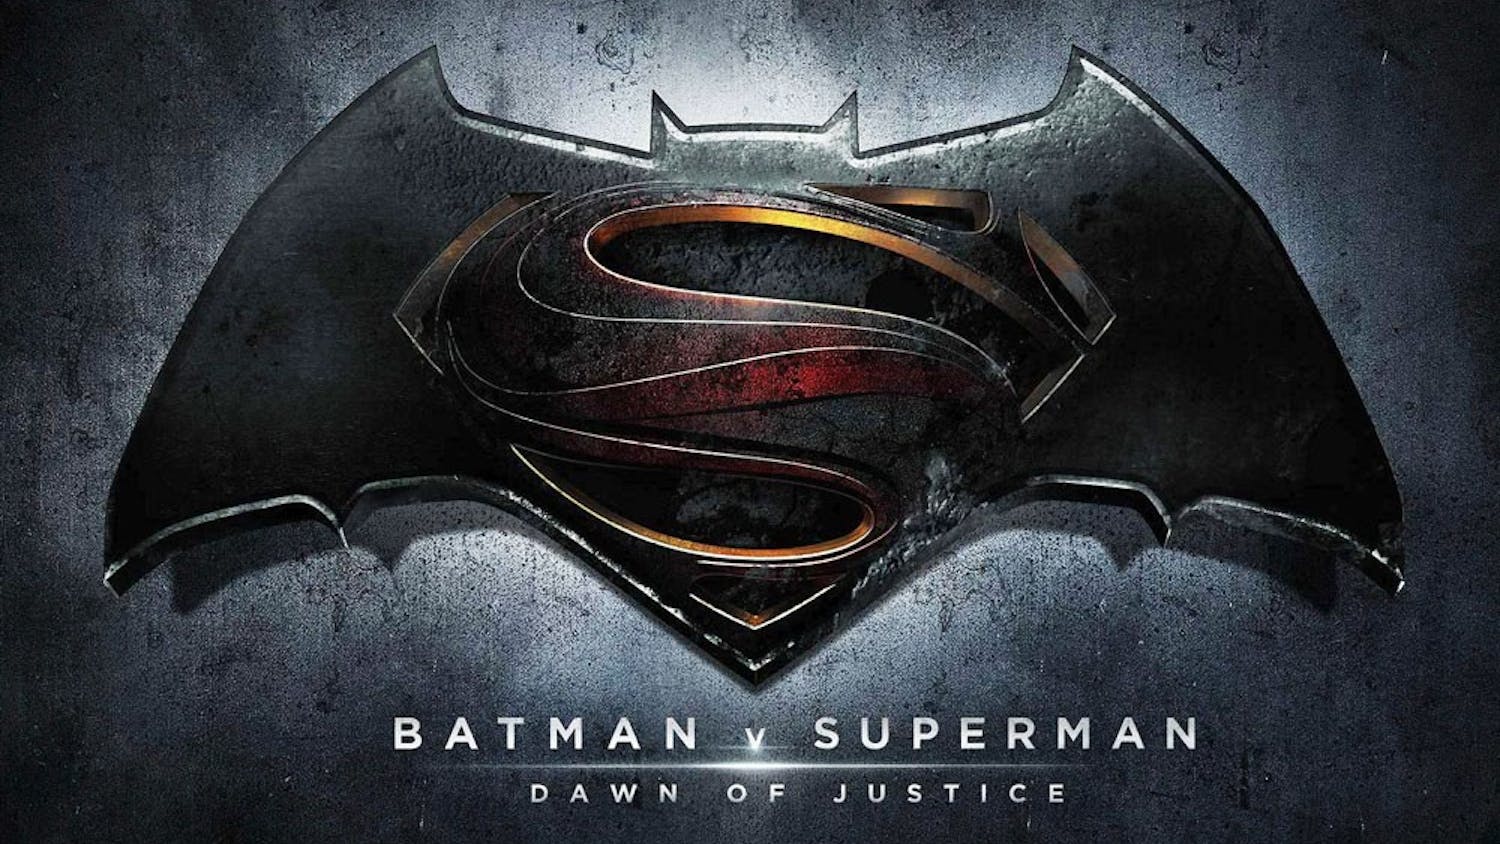 "Batman V Superman: Dawn of Justice" is one of the most anticipated films of the year&nbsp;and hits theaters March 25.&nbsp;